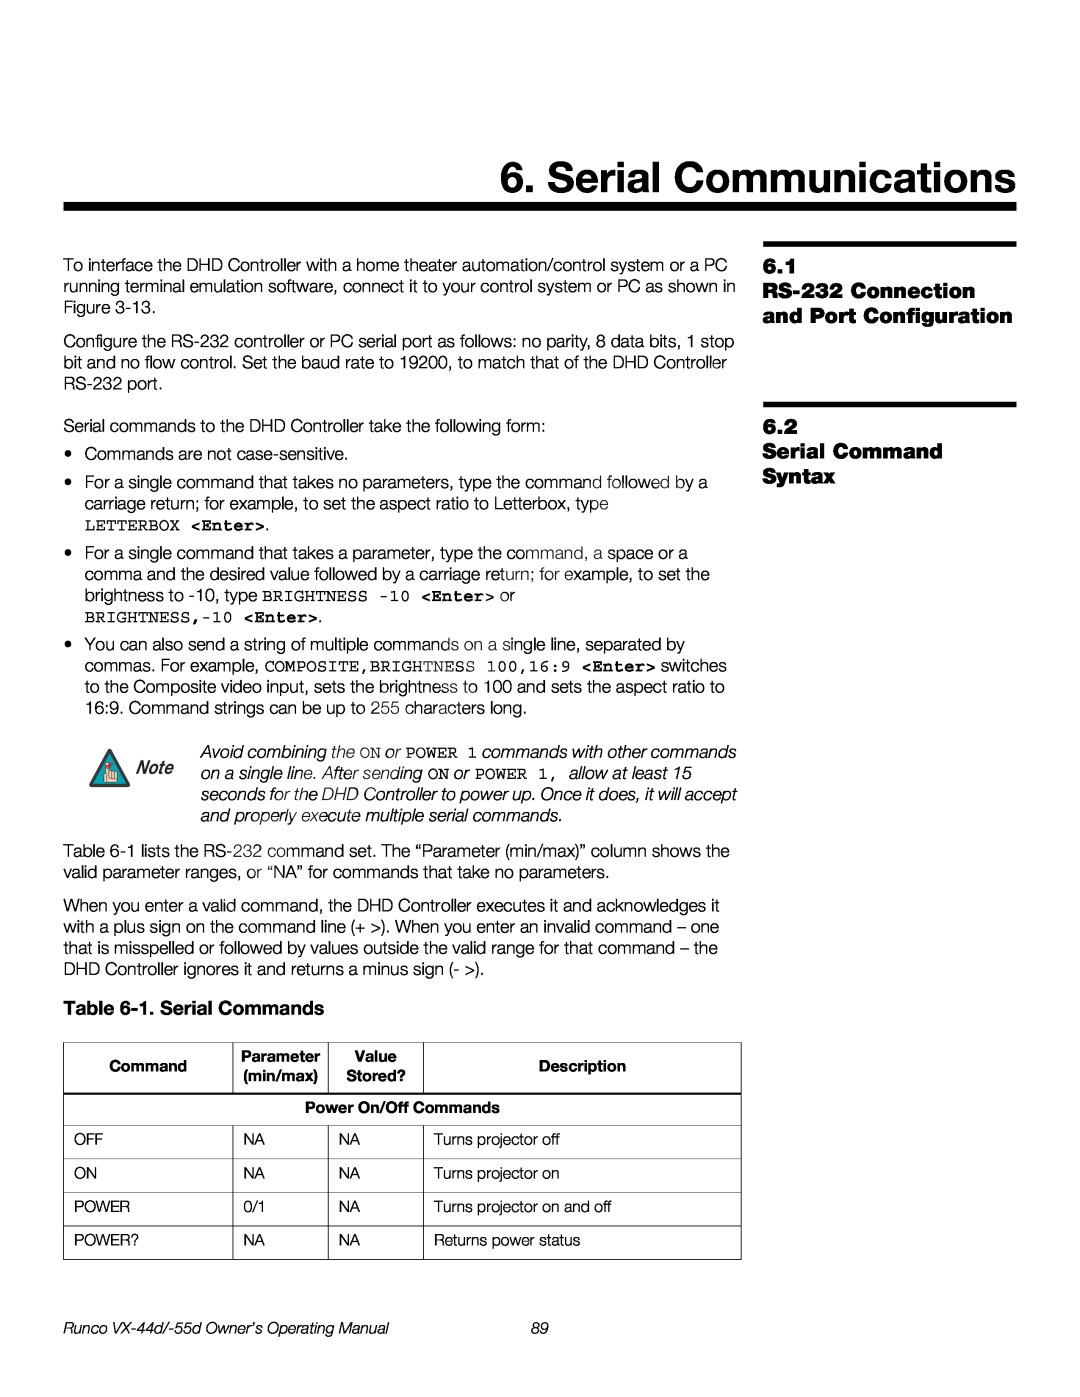 Runco VX-55D, VX-44D manual Serial Communications, 6.1 RS-232 Connection and Port Configuration, Serial Command Syntax 